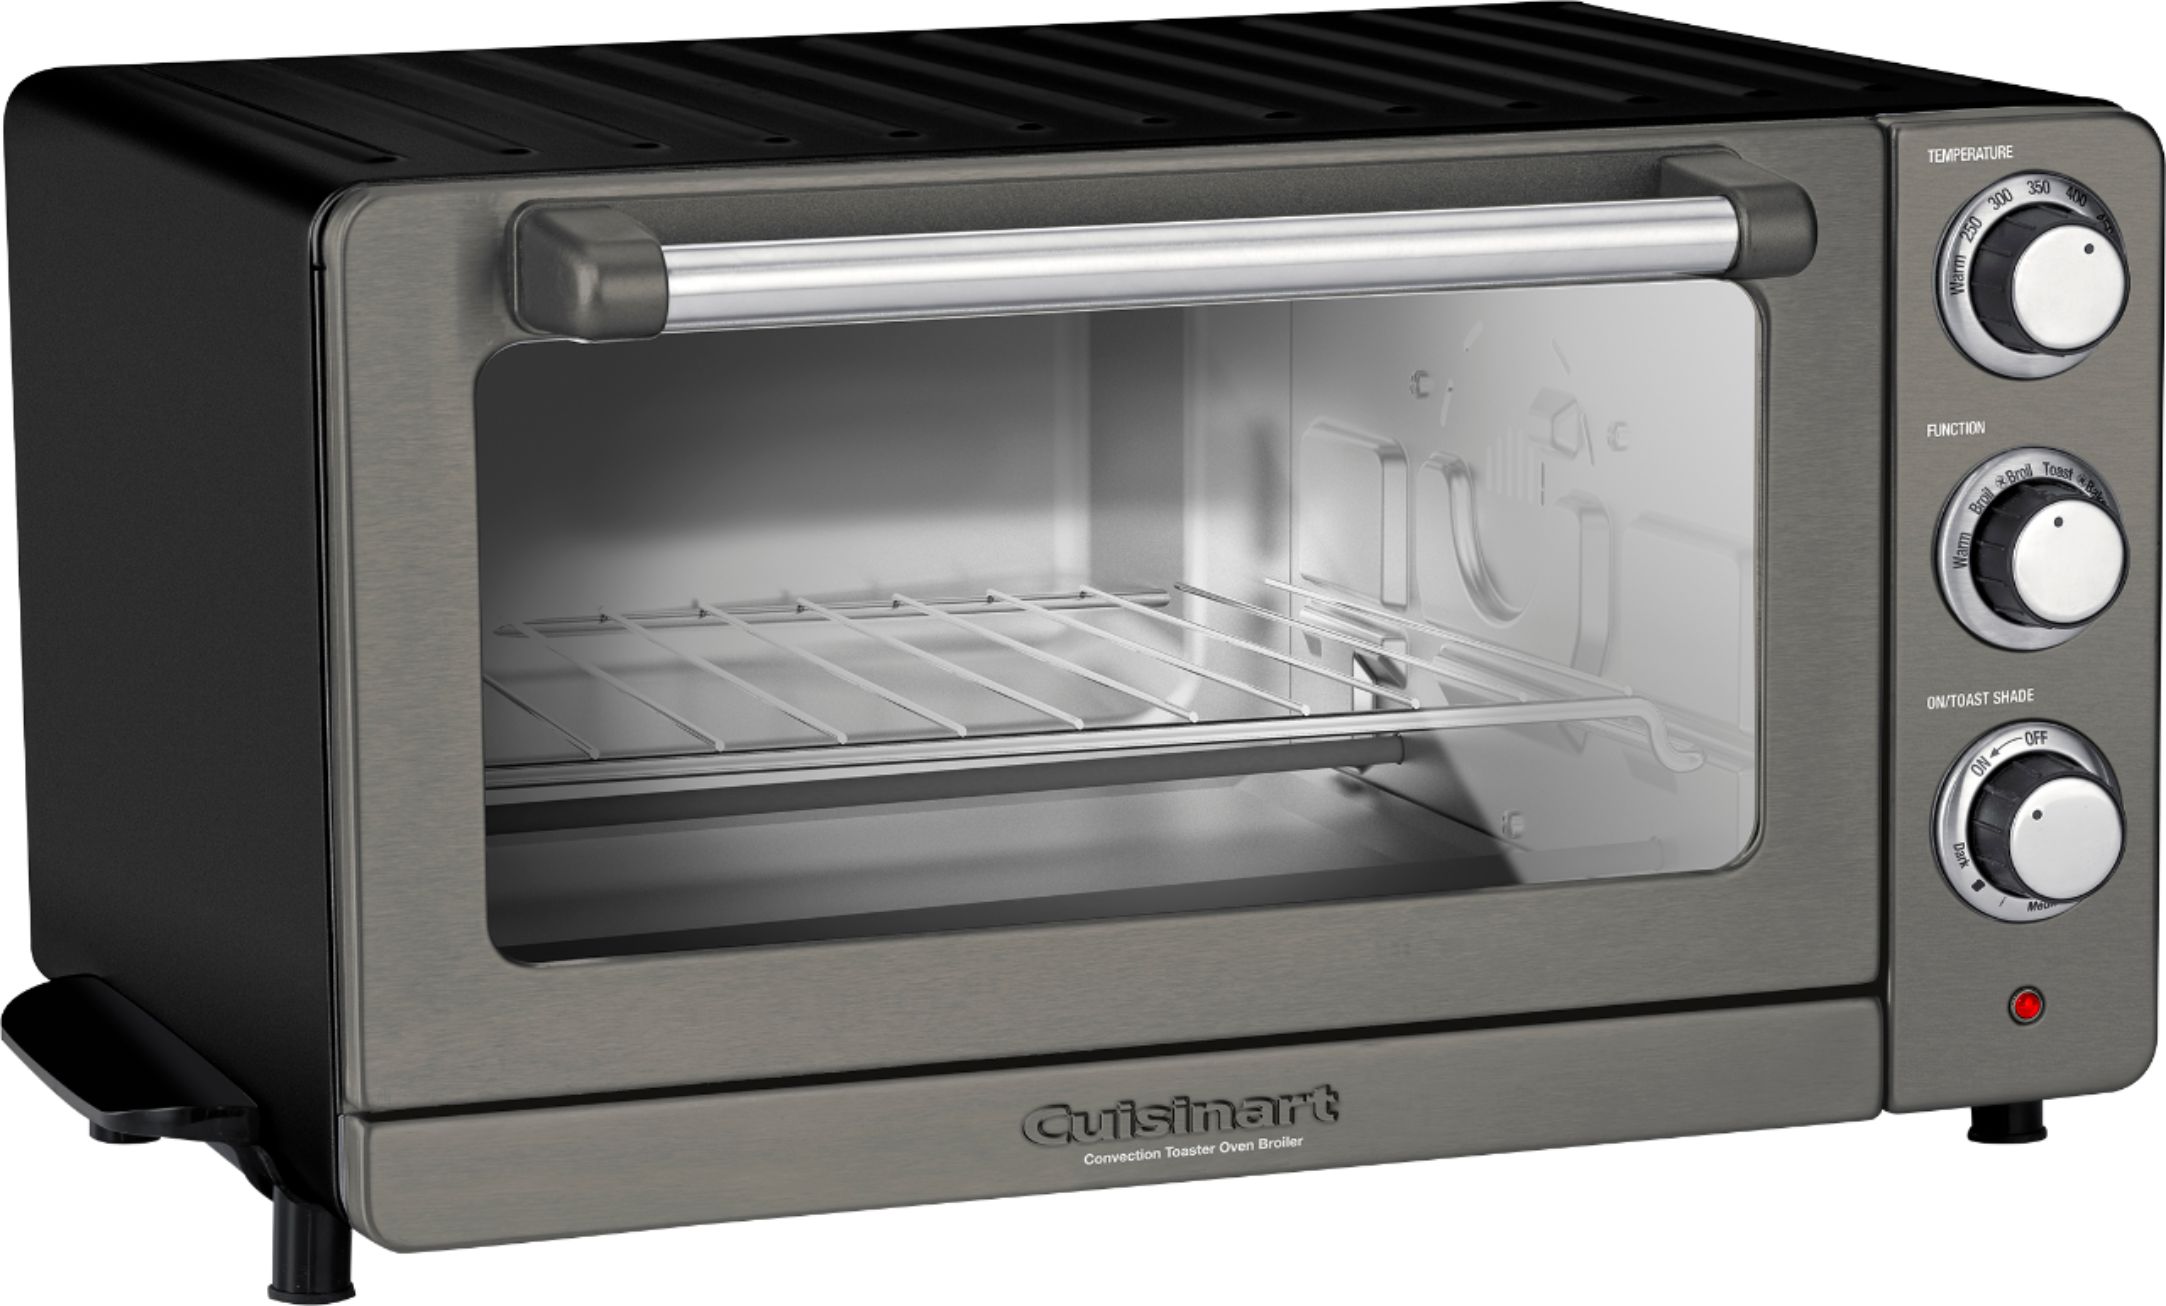 convection toaster oven vs toaster oven